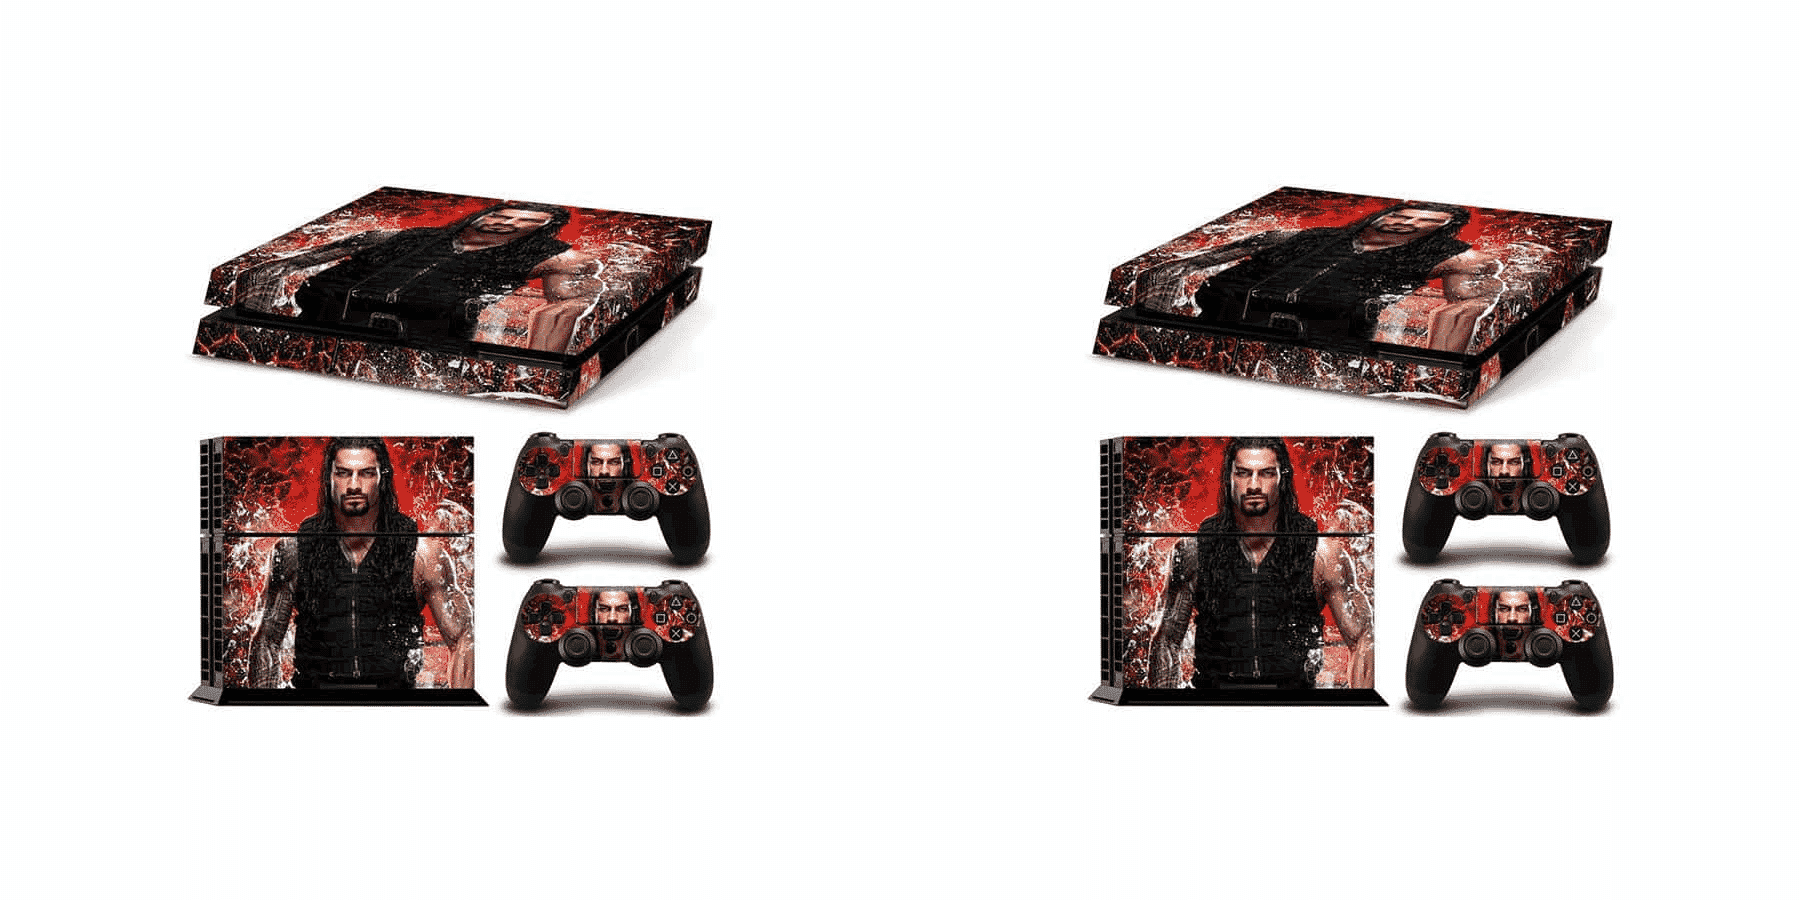 Set of 2 Roman Reigns Printed Sticker for PlayStation 4 - 3 Piece